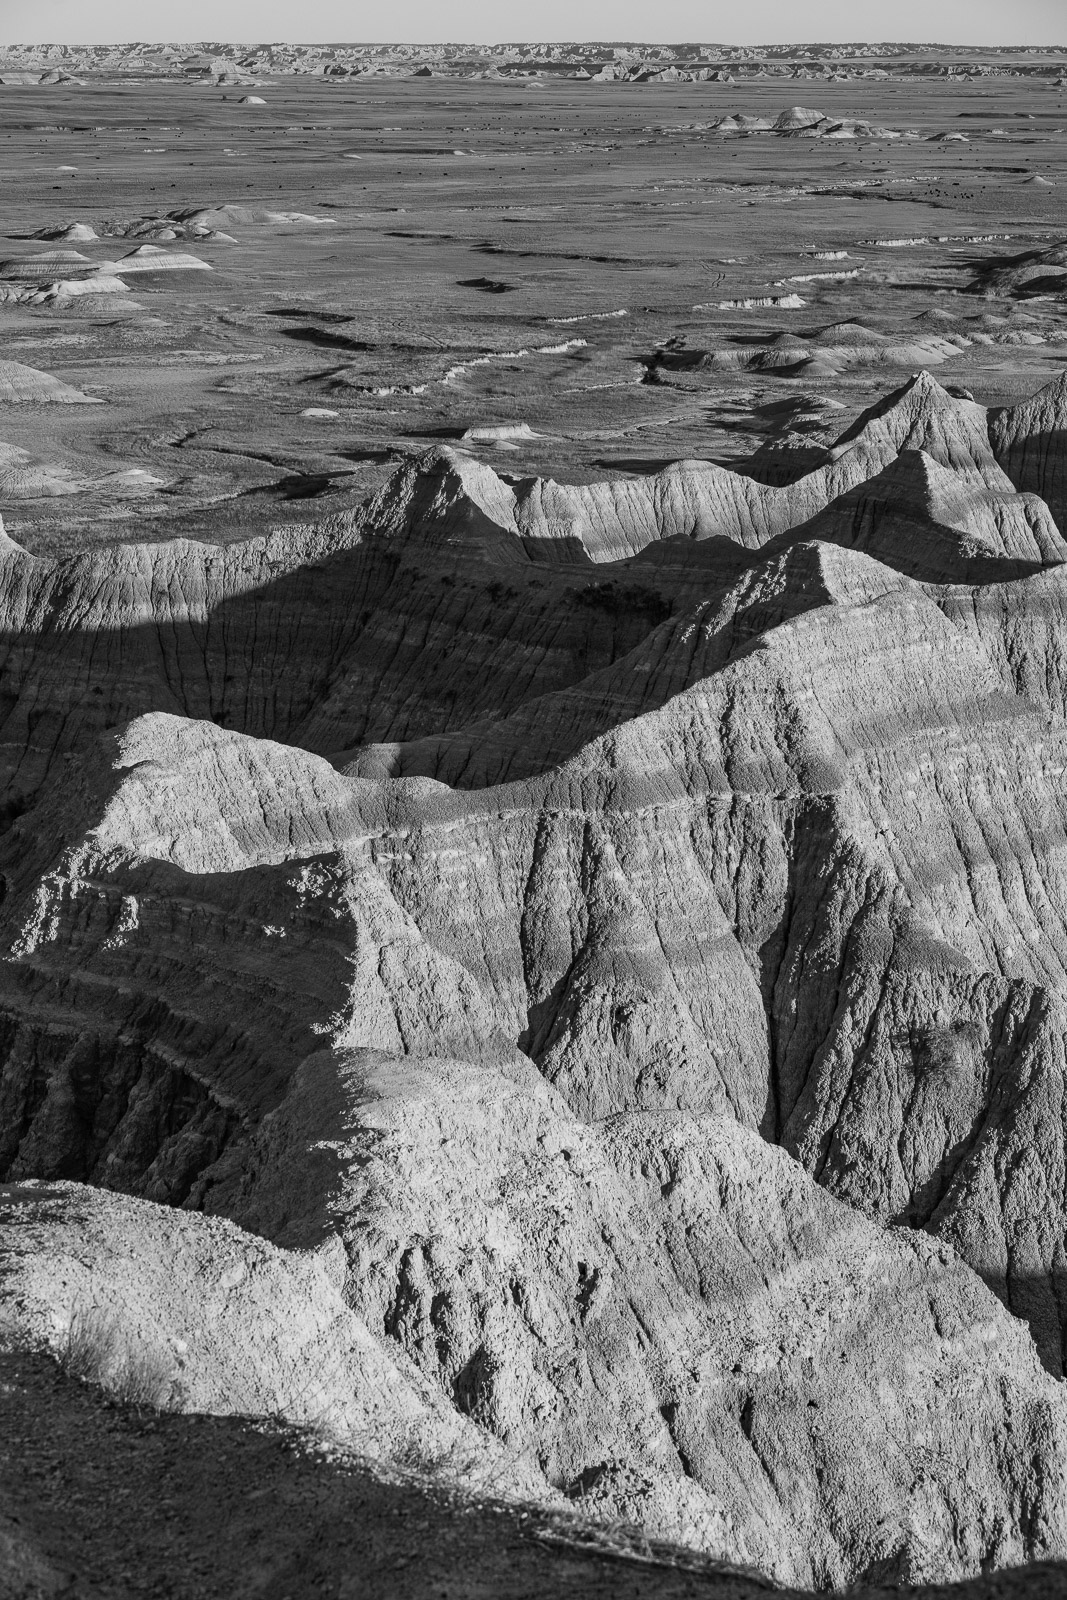 This view of the erosional features is enhanced by the starkness of the black and white treatment. Without color, you can concentrate on the texture and patterns created by the relentless work of water and wind.